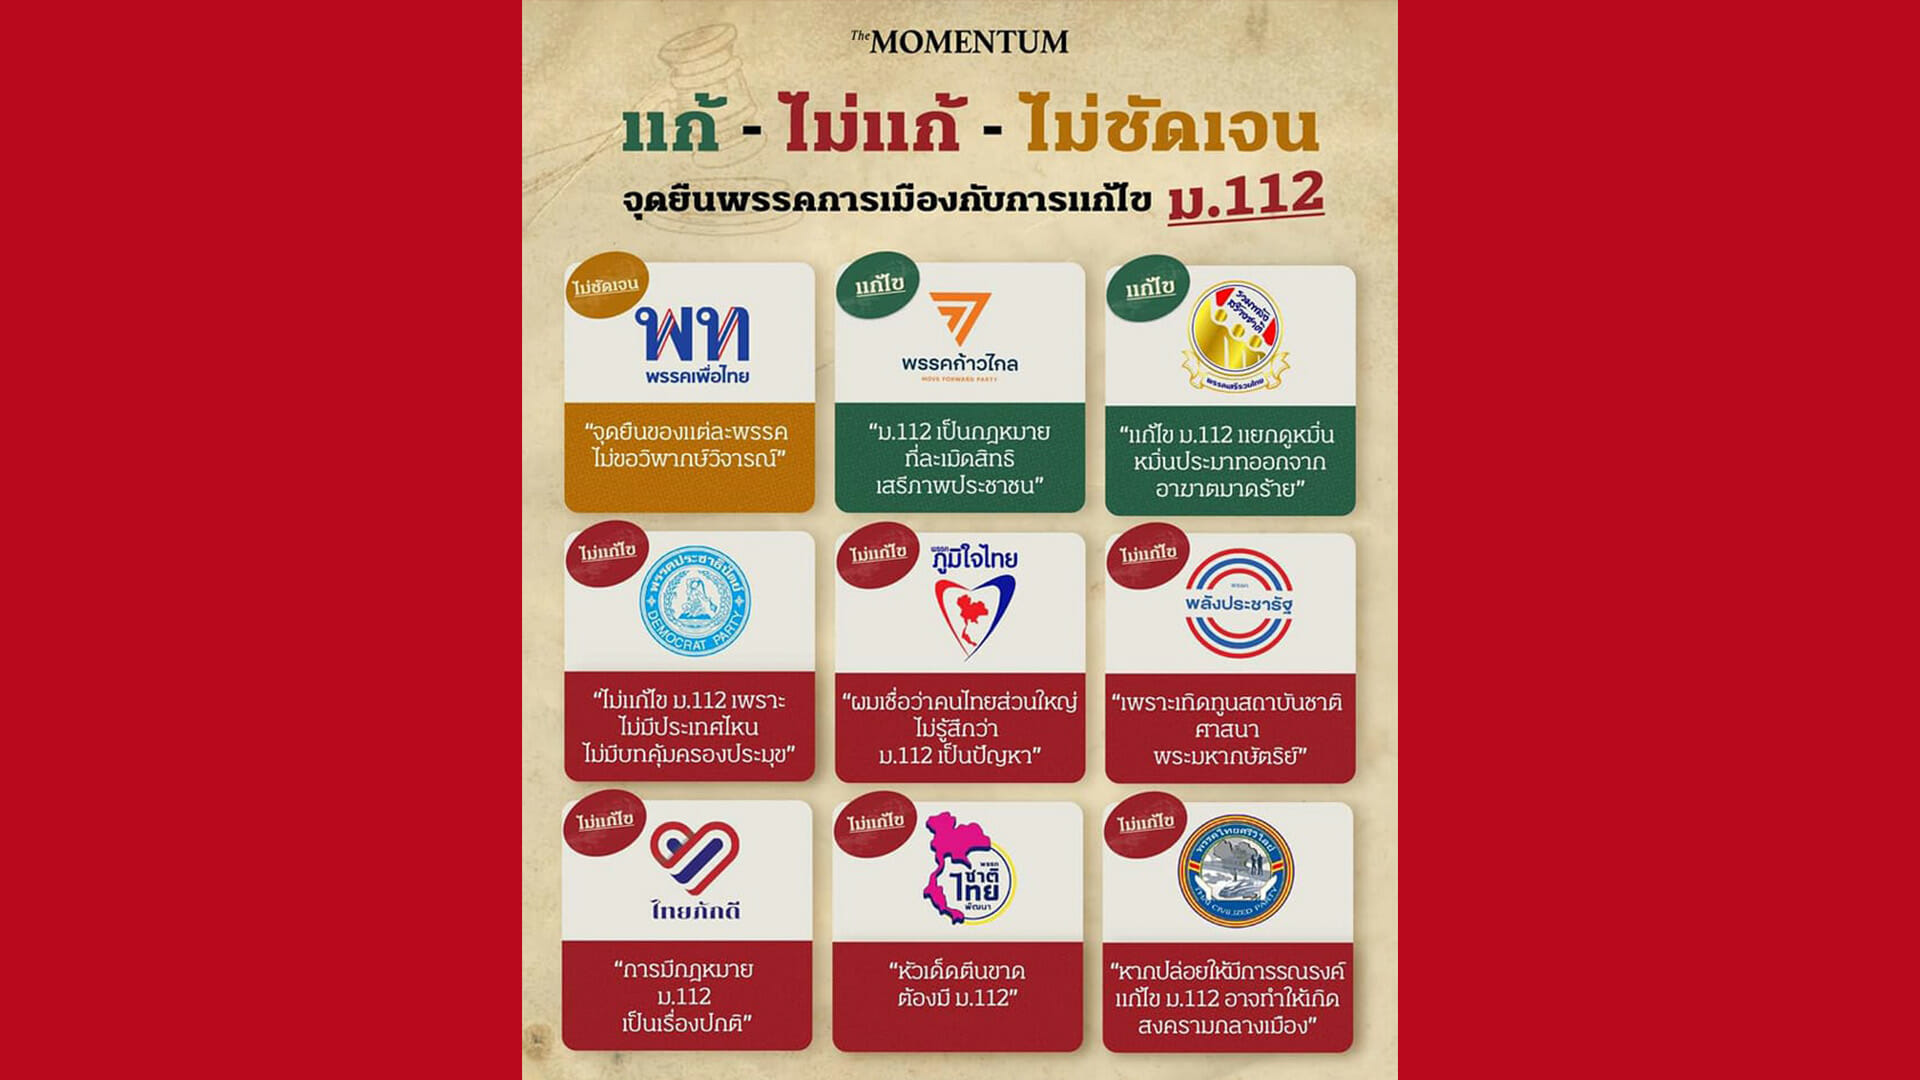 Most Thai Parties Rejected Reform of Article 112